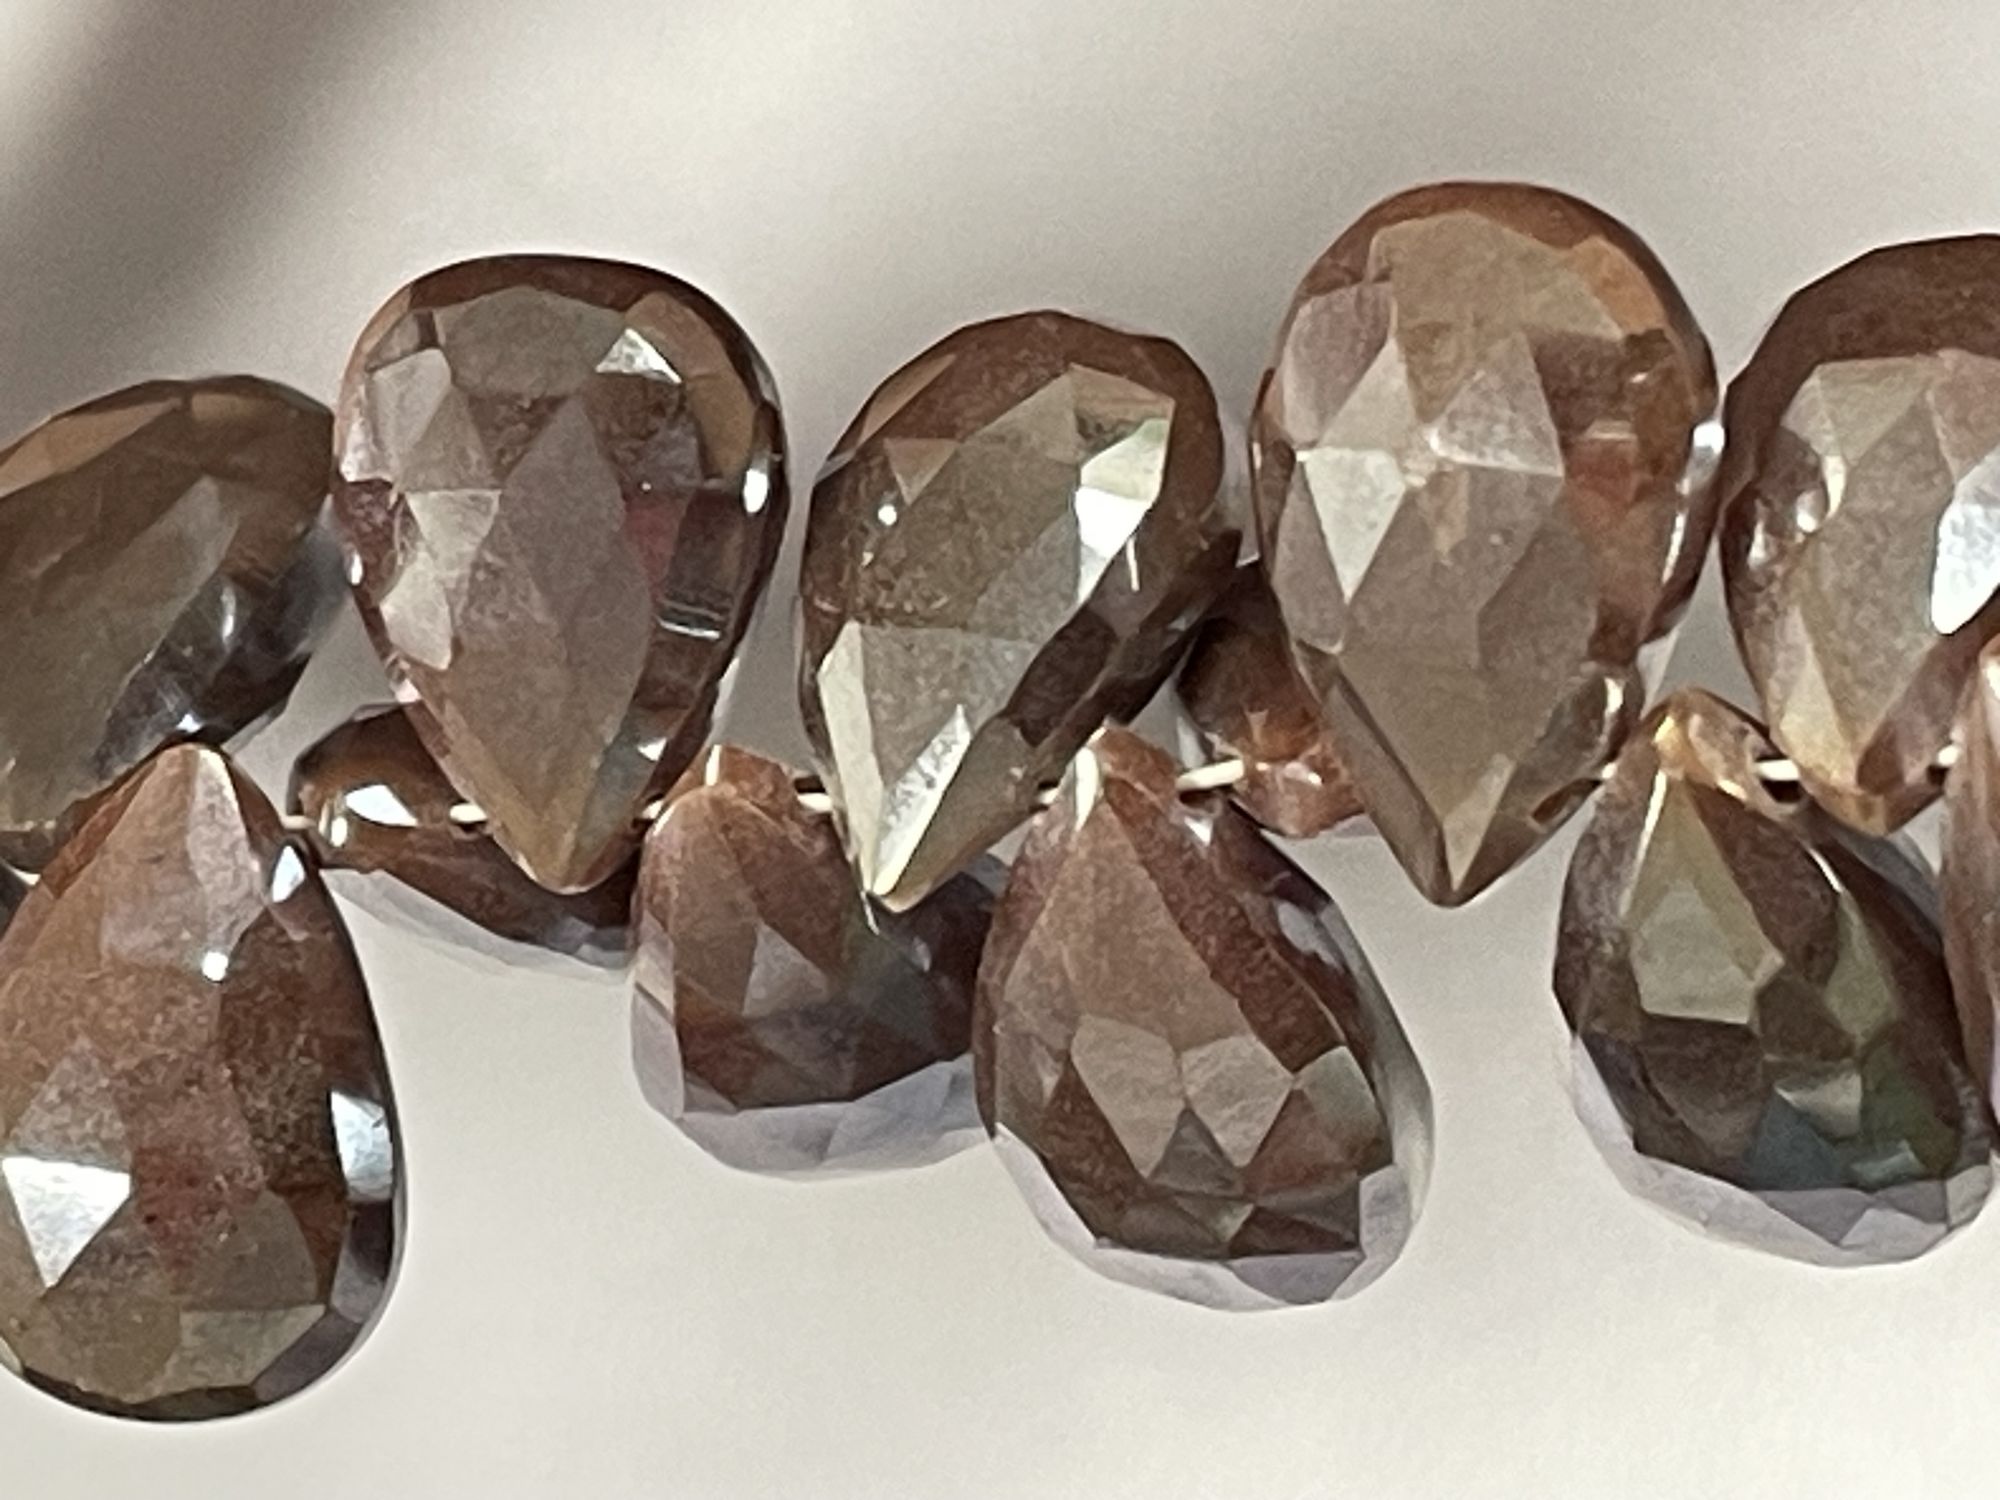 Coated Chocolate Moonstone Pear Faceted